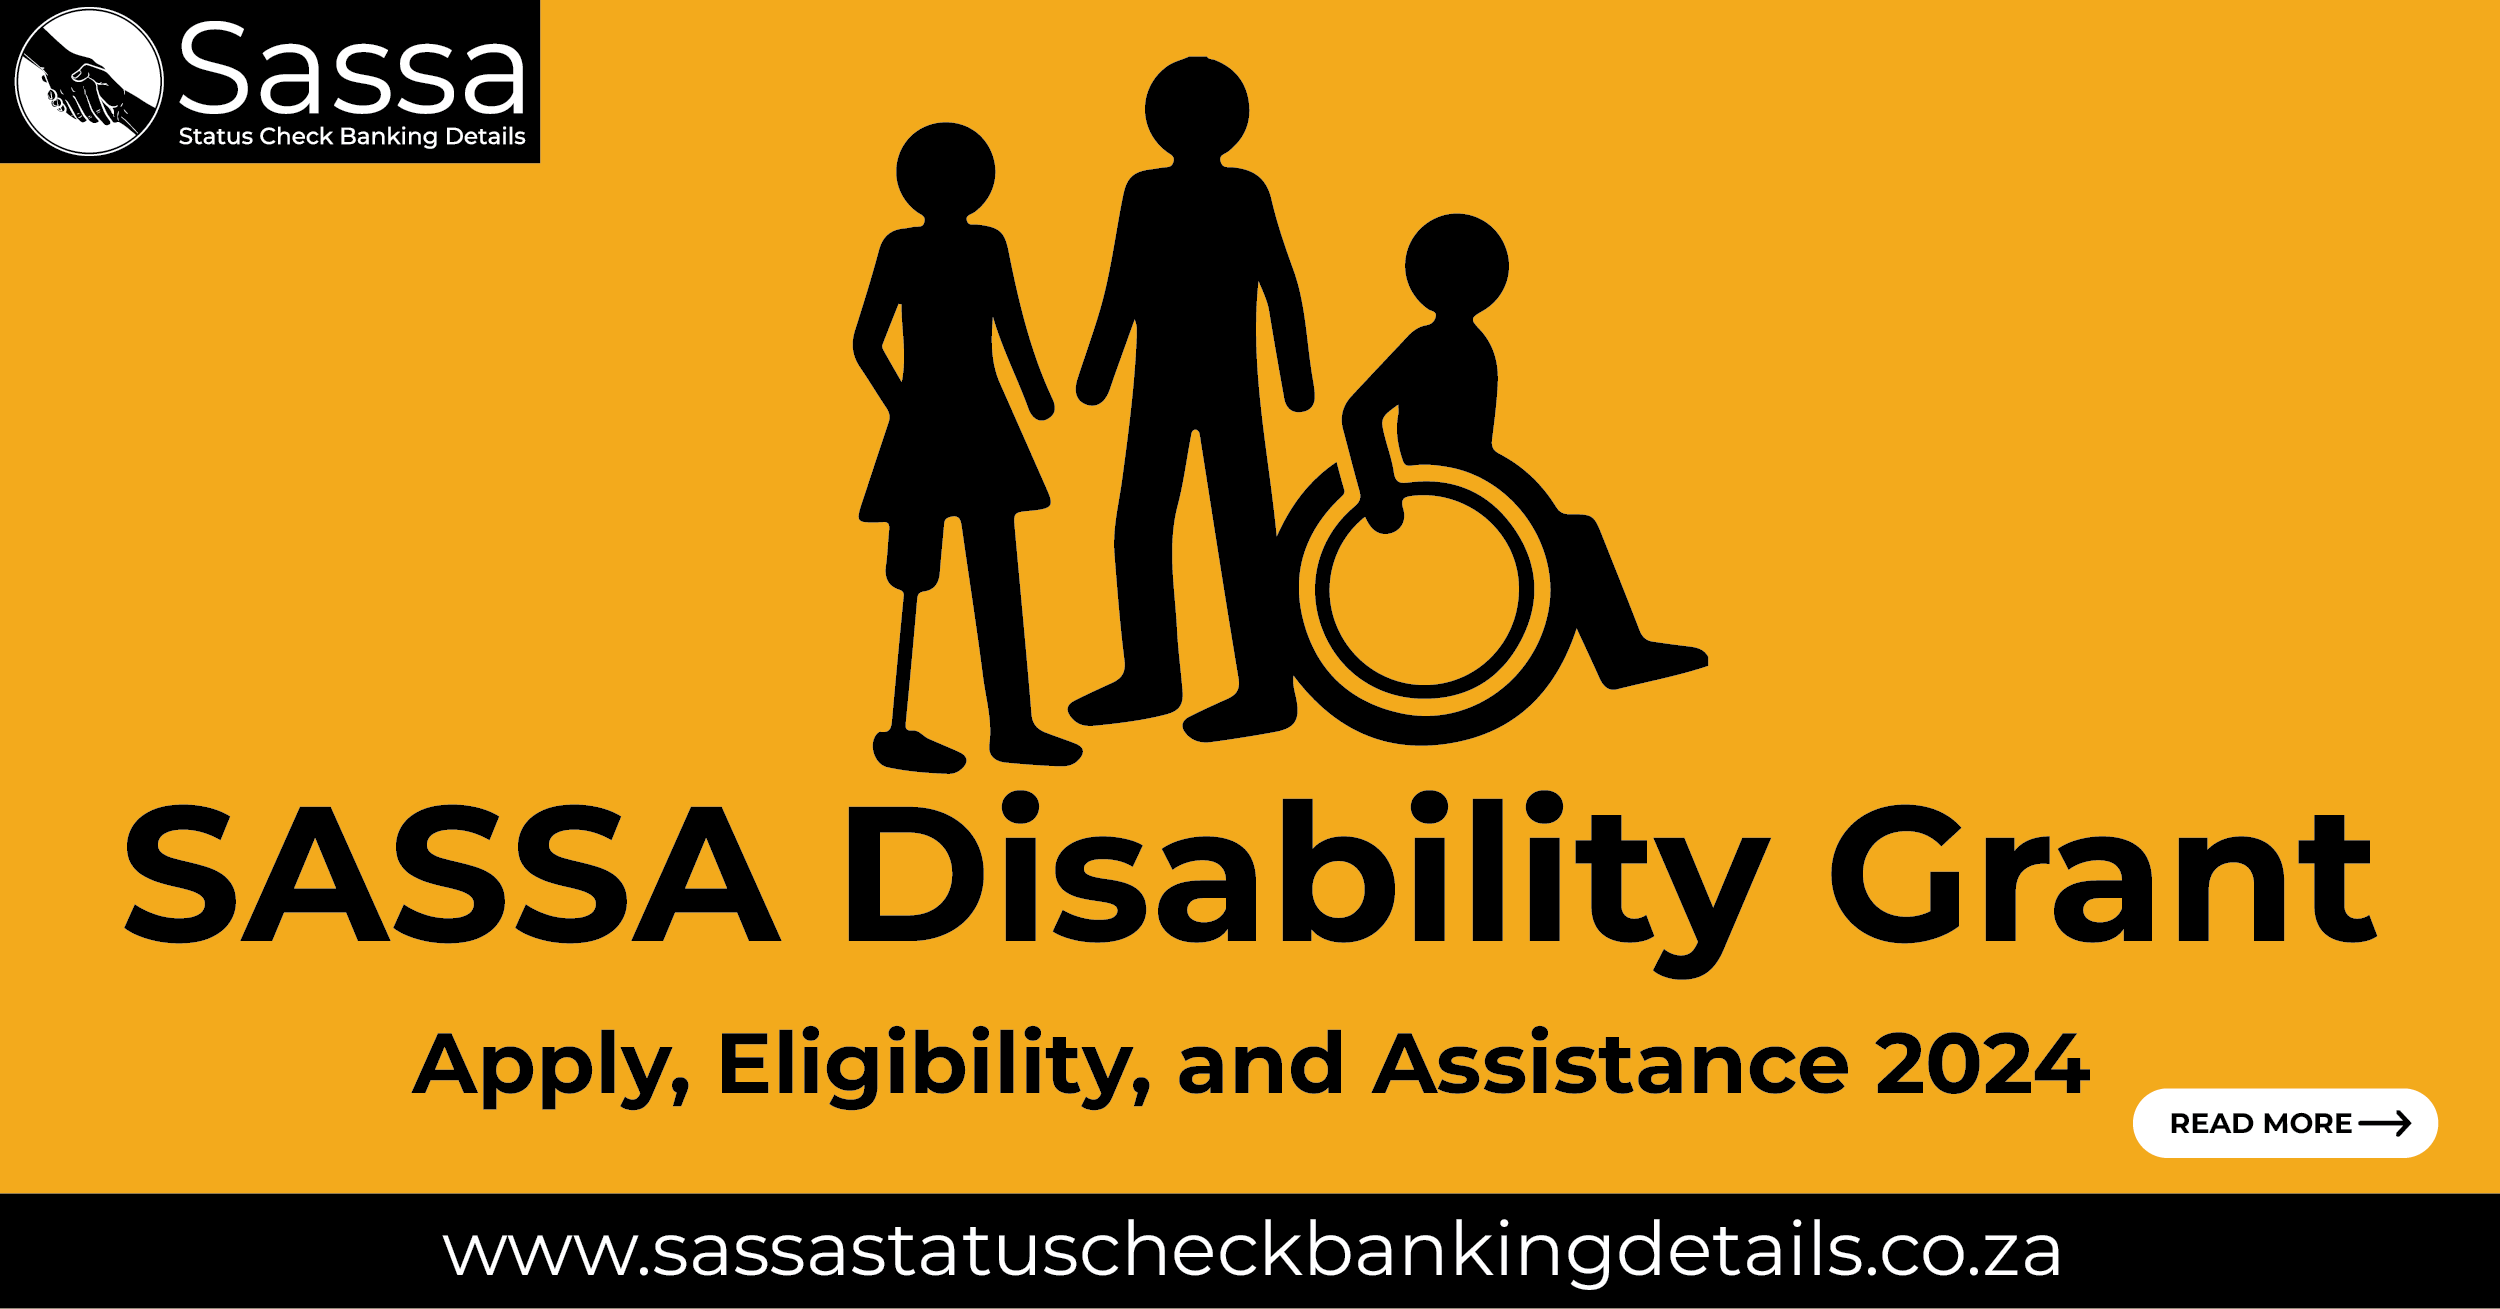 SASSA Disability Grant 2024: Apply, Eligibility, and Assistance